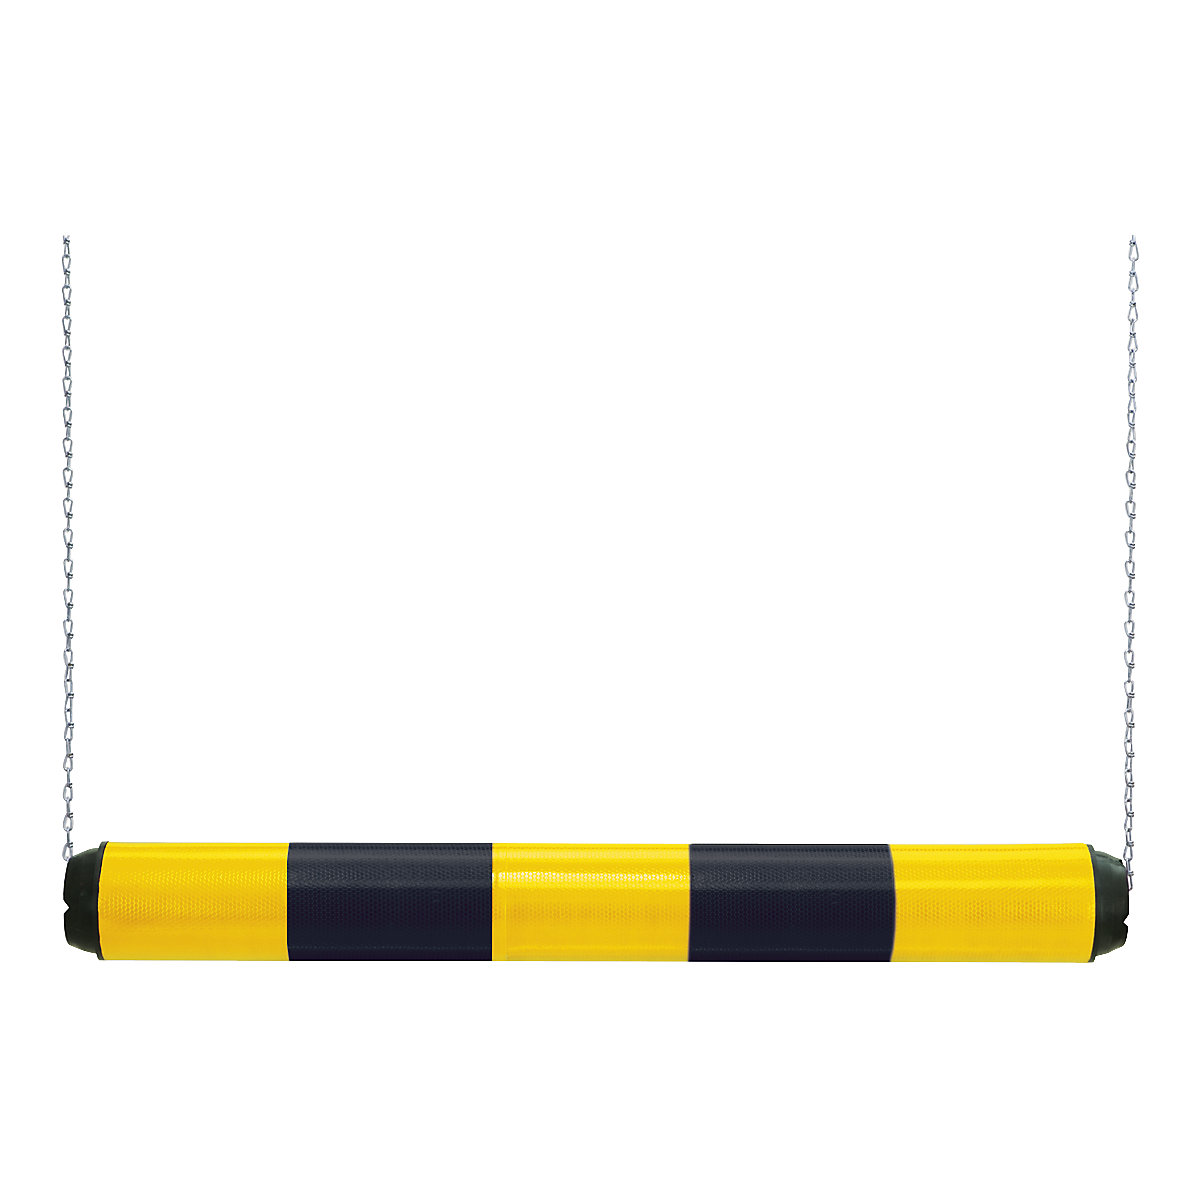 Plastic height limiter, length 950 mm, reflective yellow/black, 4+ items-1